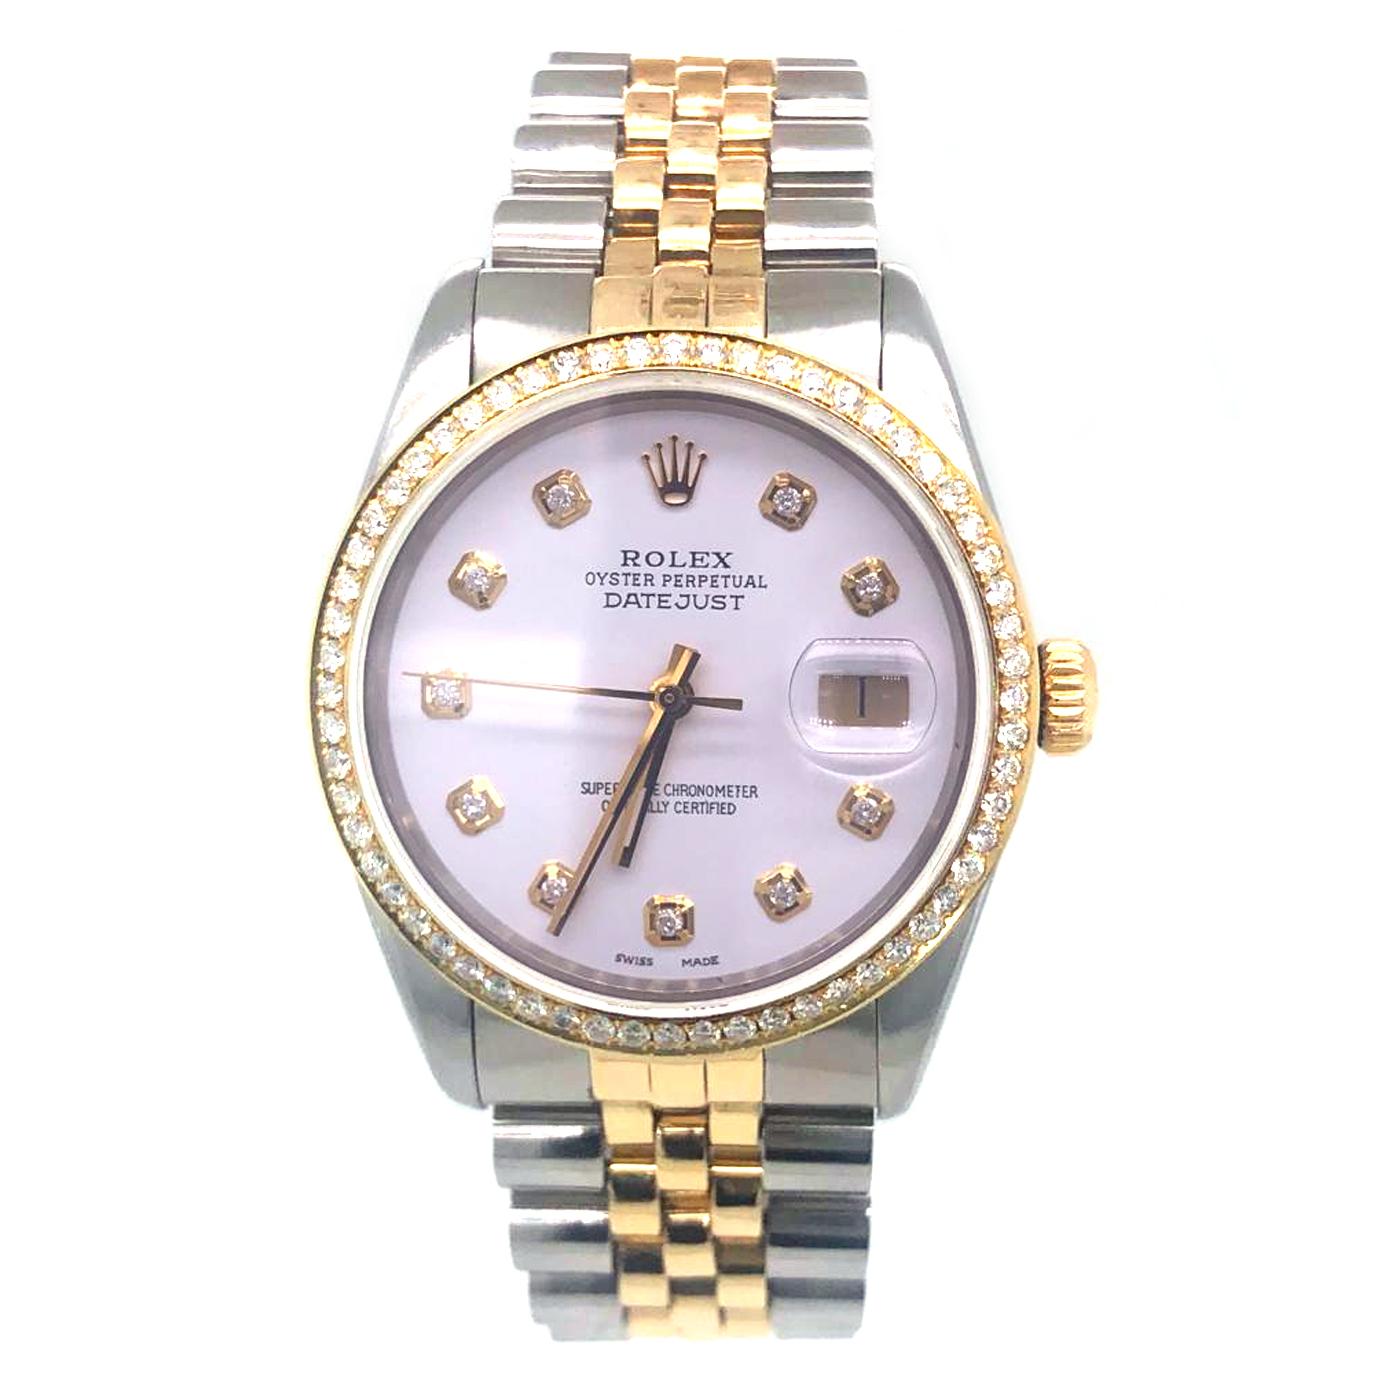 Gender: Men
Case Size: 36mm
Case: Stainless Steel Oyster Case.
Total Diamonds: Approx. 1.65 carat F VS1 Diamonds.
Movement: Fully Automatic Movement Winds Itself When Worn.
Bracelet: Stainless Steel Yellow Gold Jubilee Bracelet with Folding